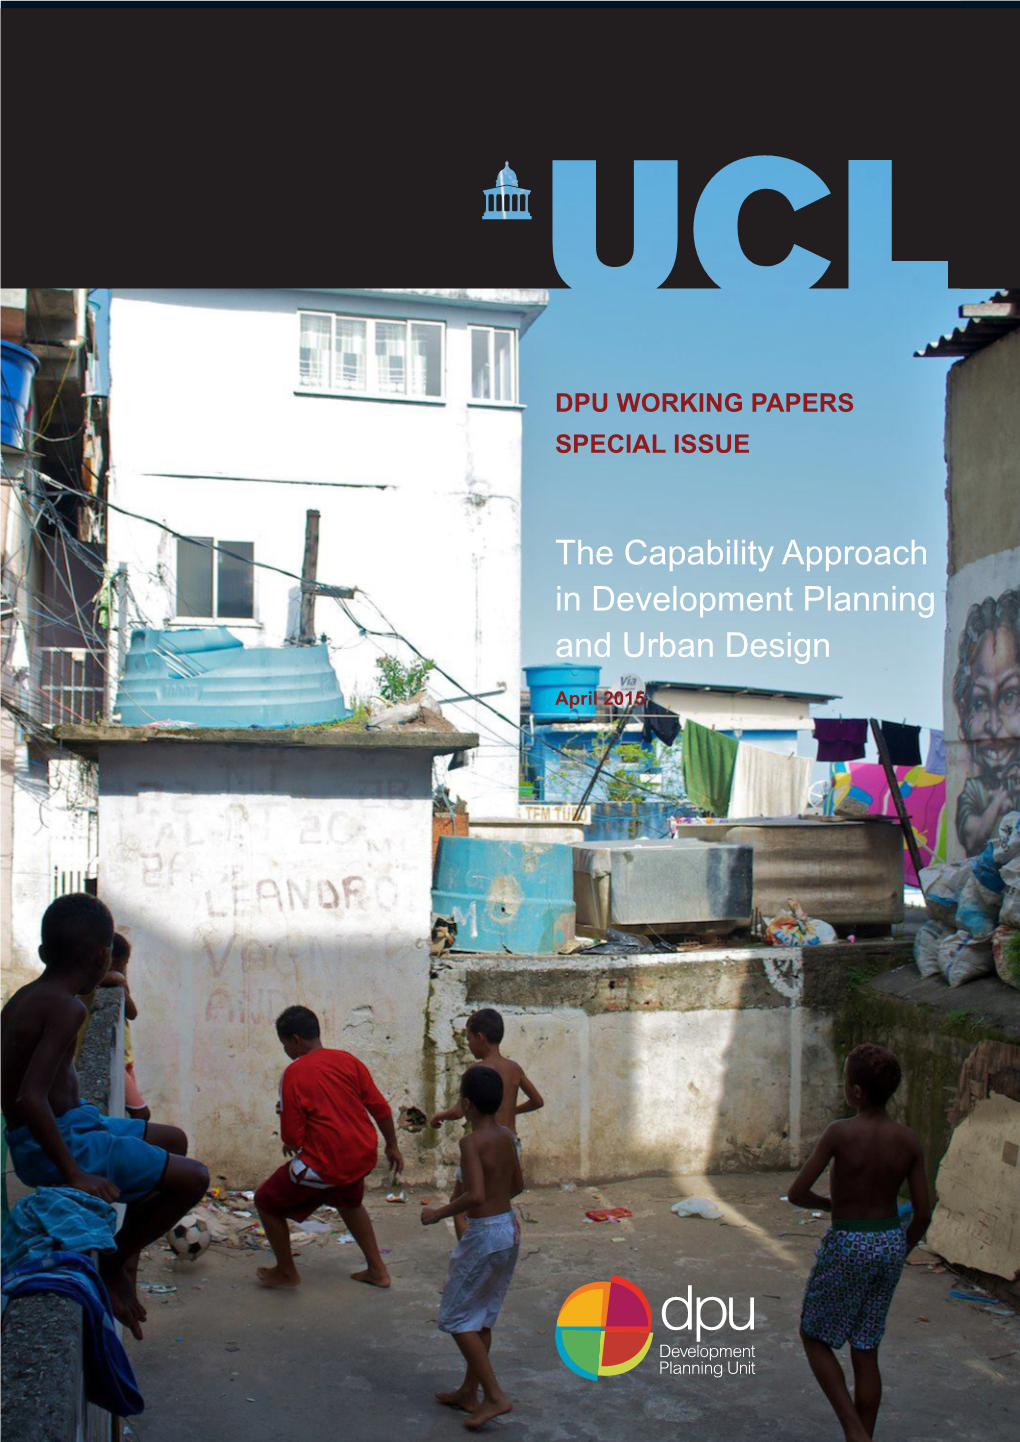 The Capability Approach in Development Planning and Urban Design